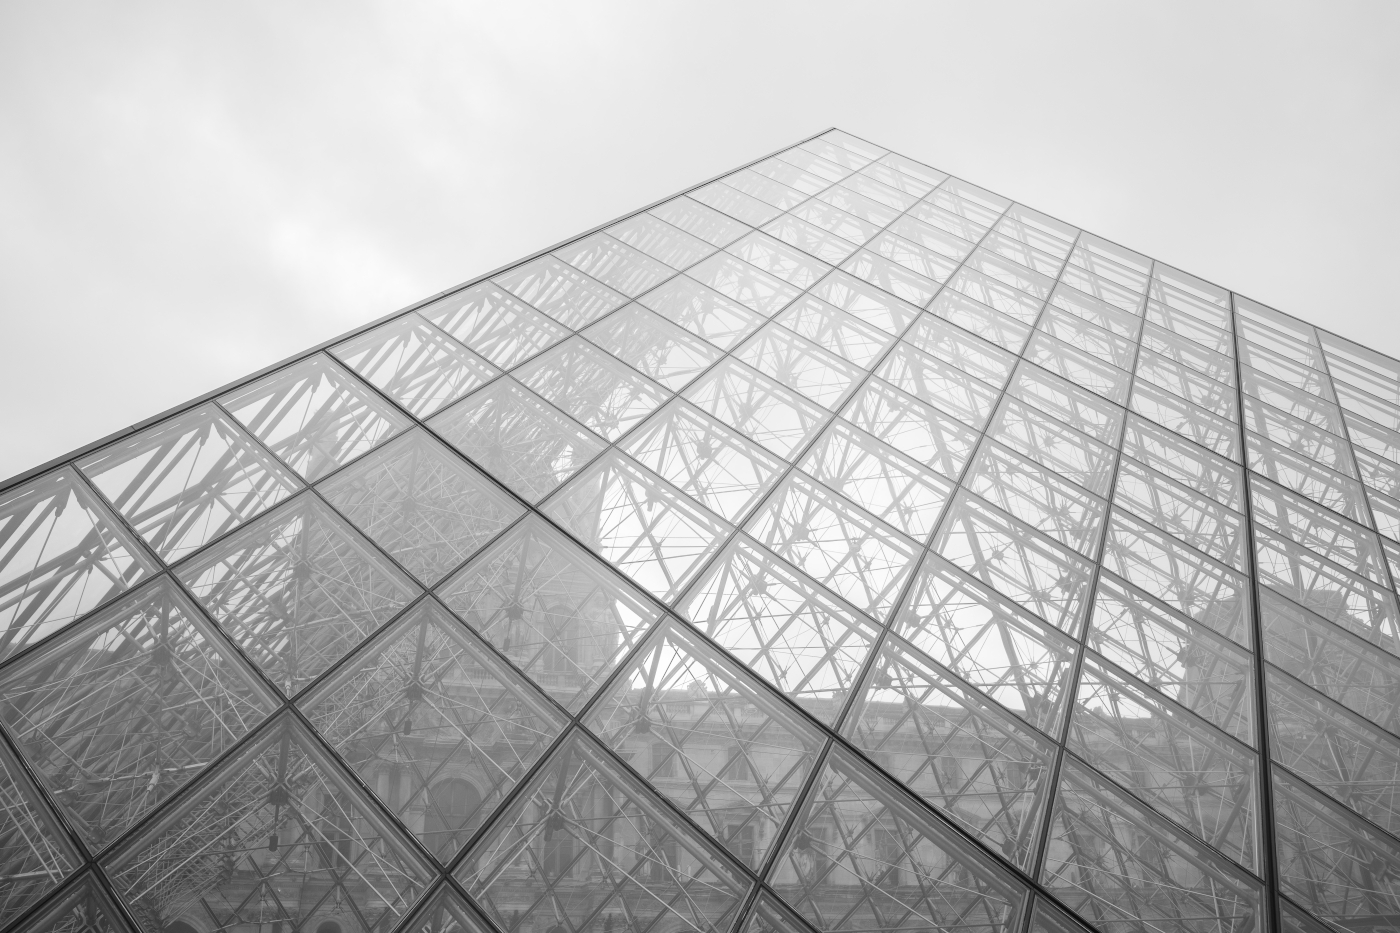 View of the pyramide of musée du Louvre